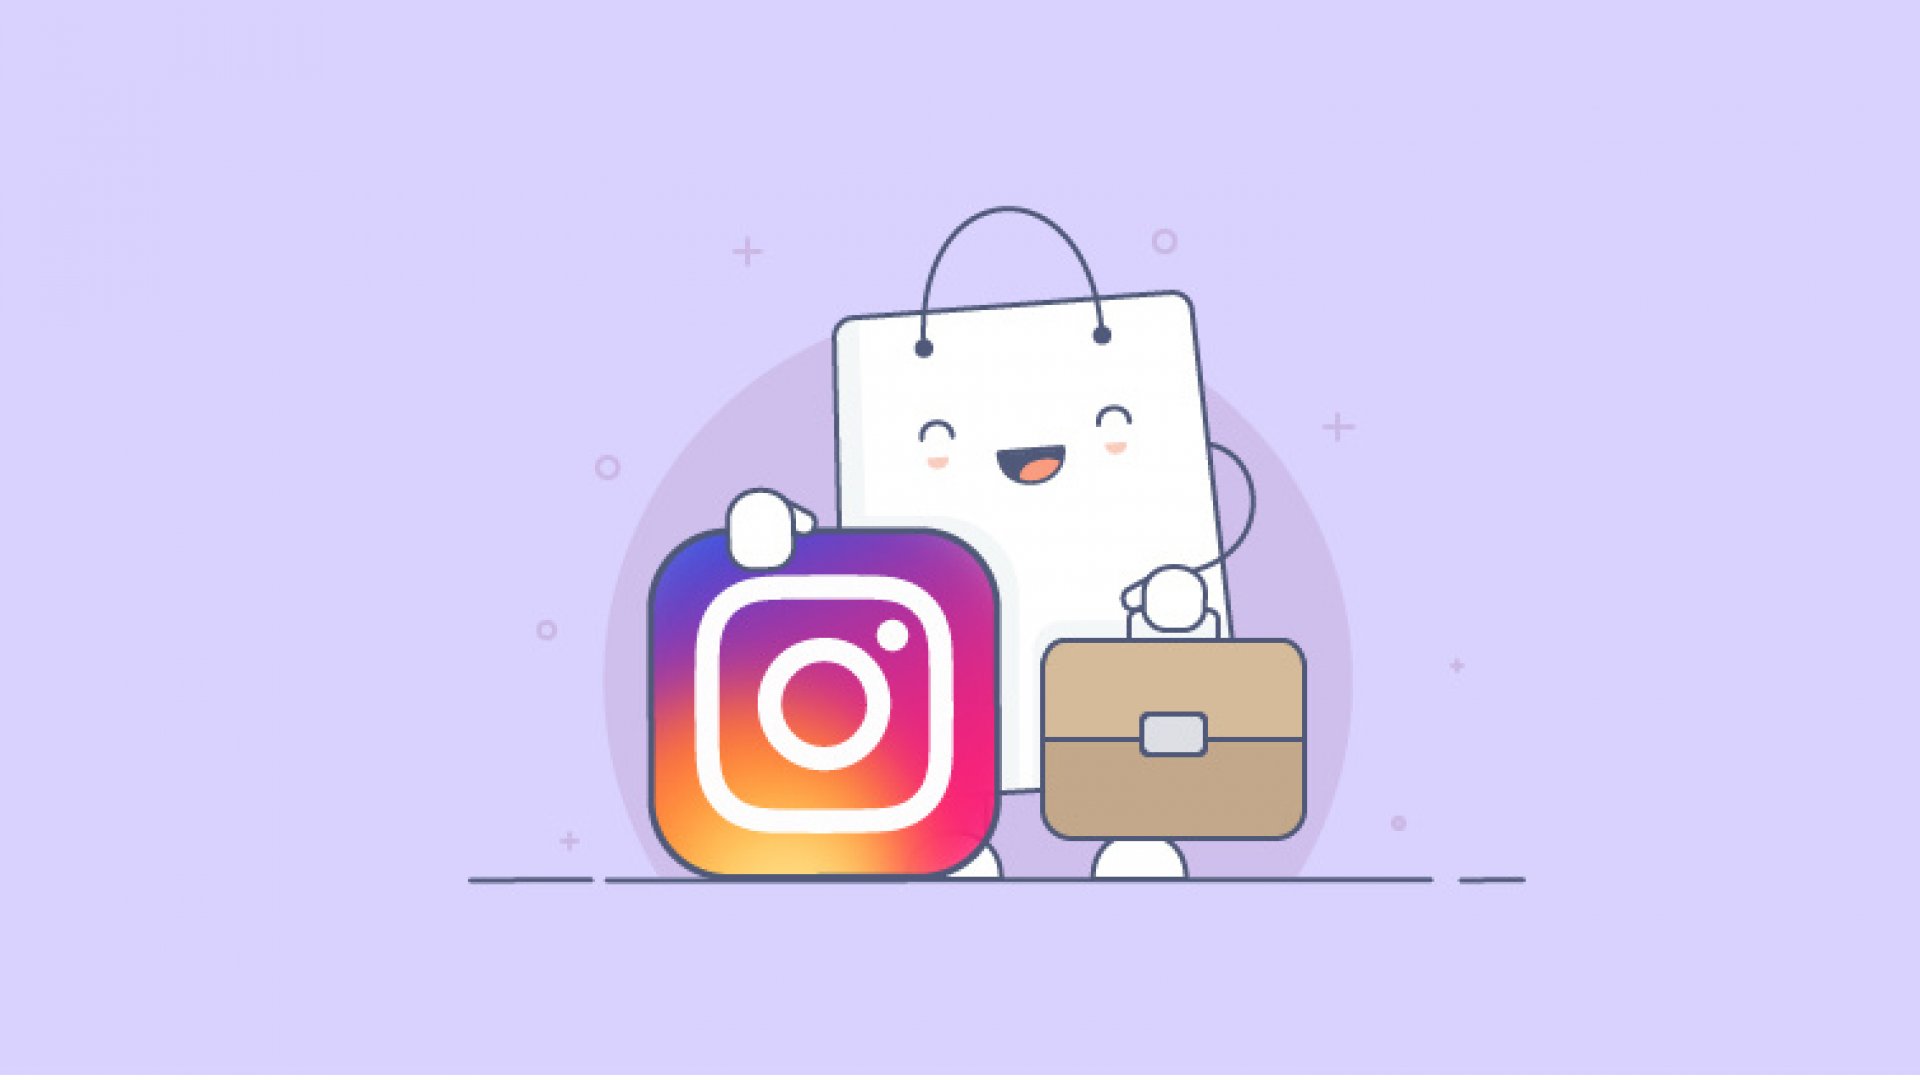 How to open an online store on Instagram?